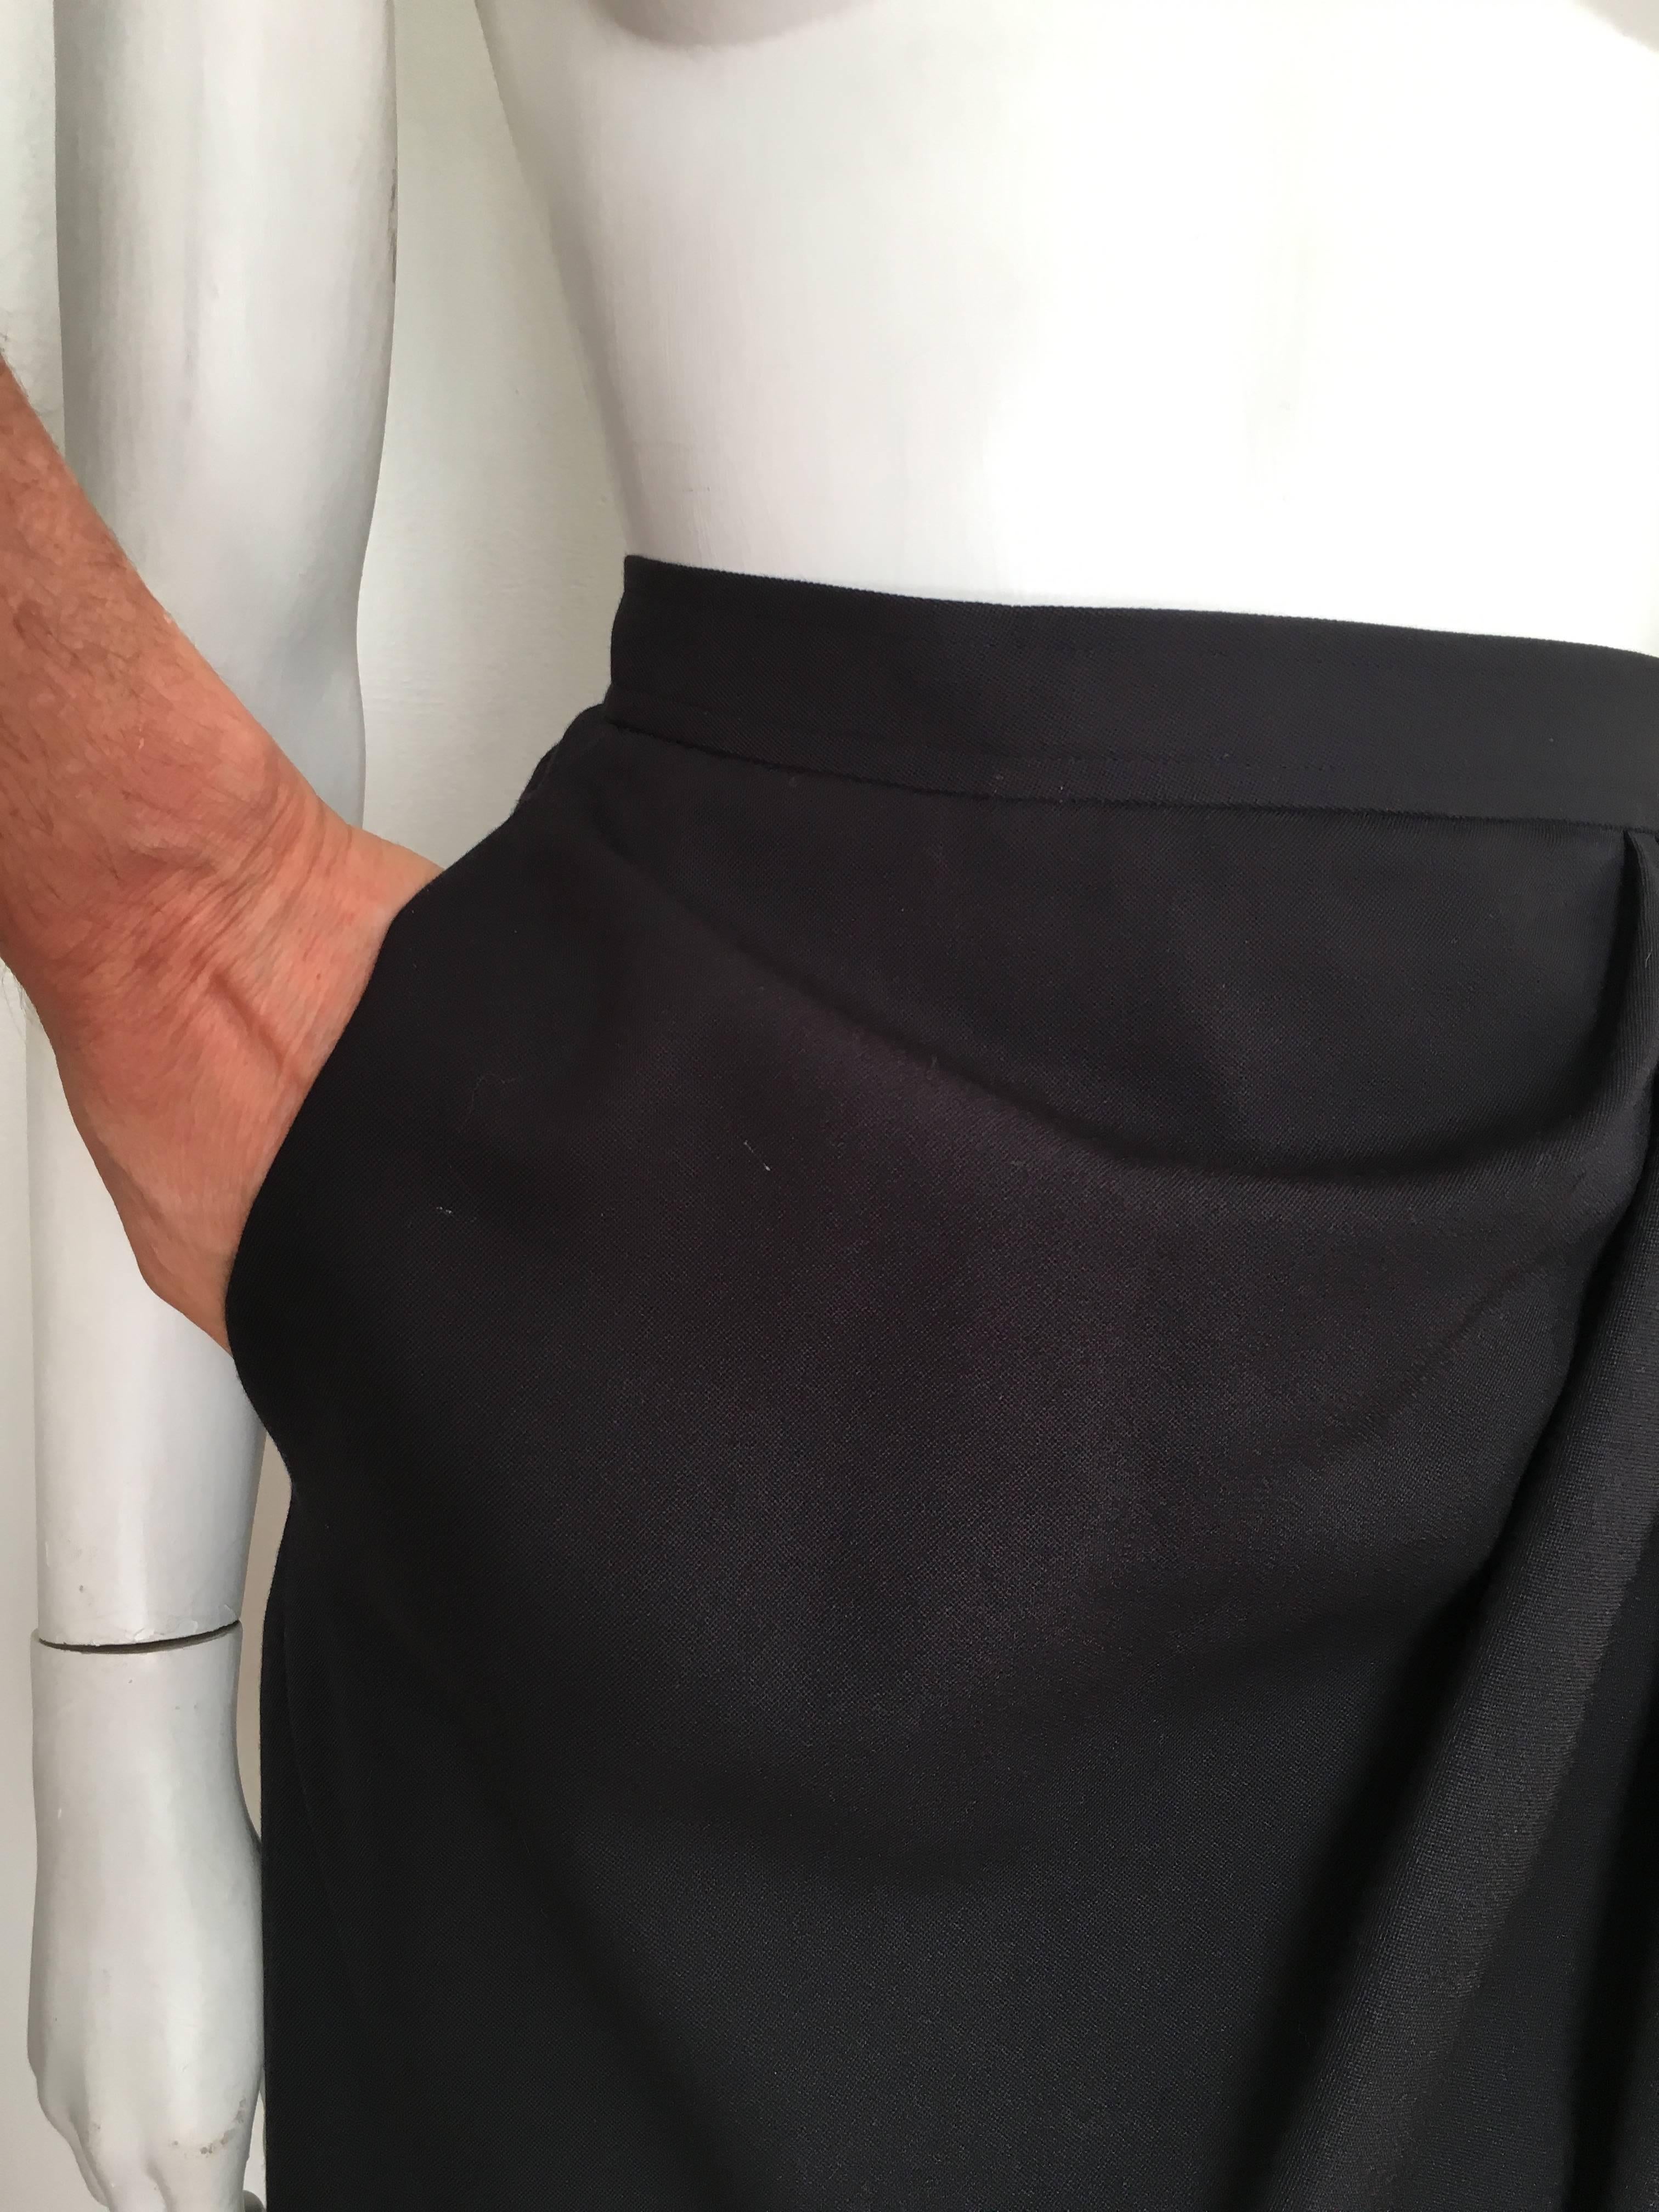 Yves Saint Laurent 1990s Black Wool Wrap Skirt with Pockets Size 6 / 8. For Sale 3